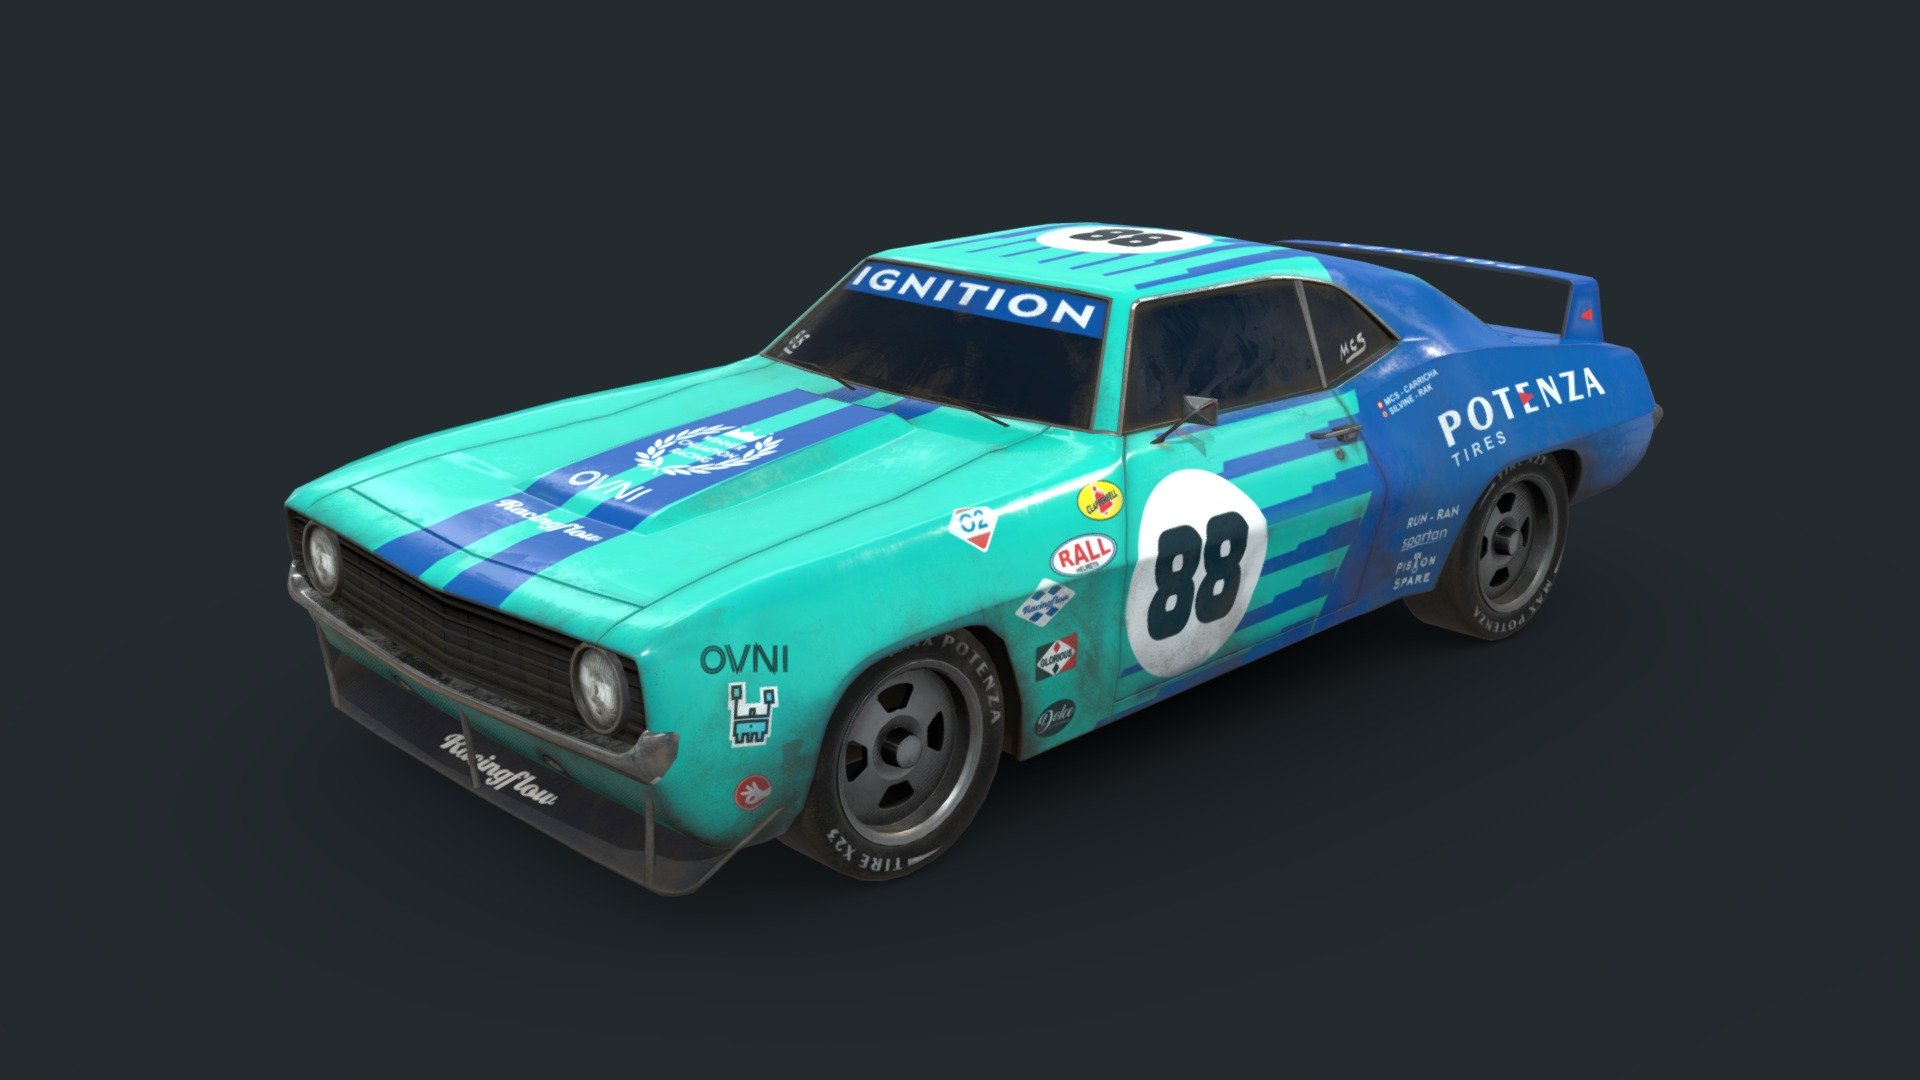 Camaro drift racing lowpoly version with 4625 polys. Trademarks changed and redeigned. 
The best on the road, the king on the podium 3d model